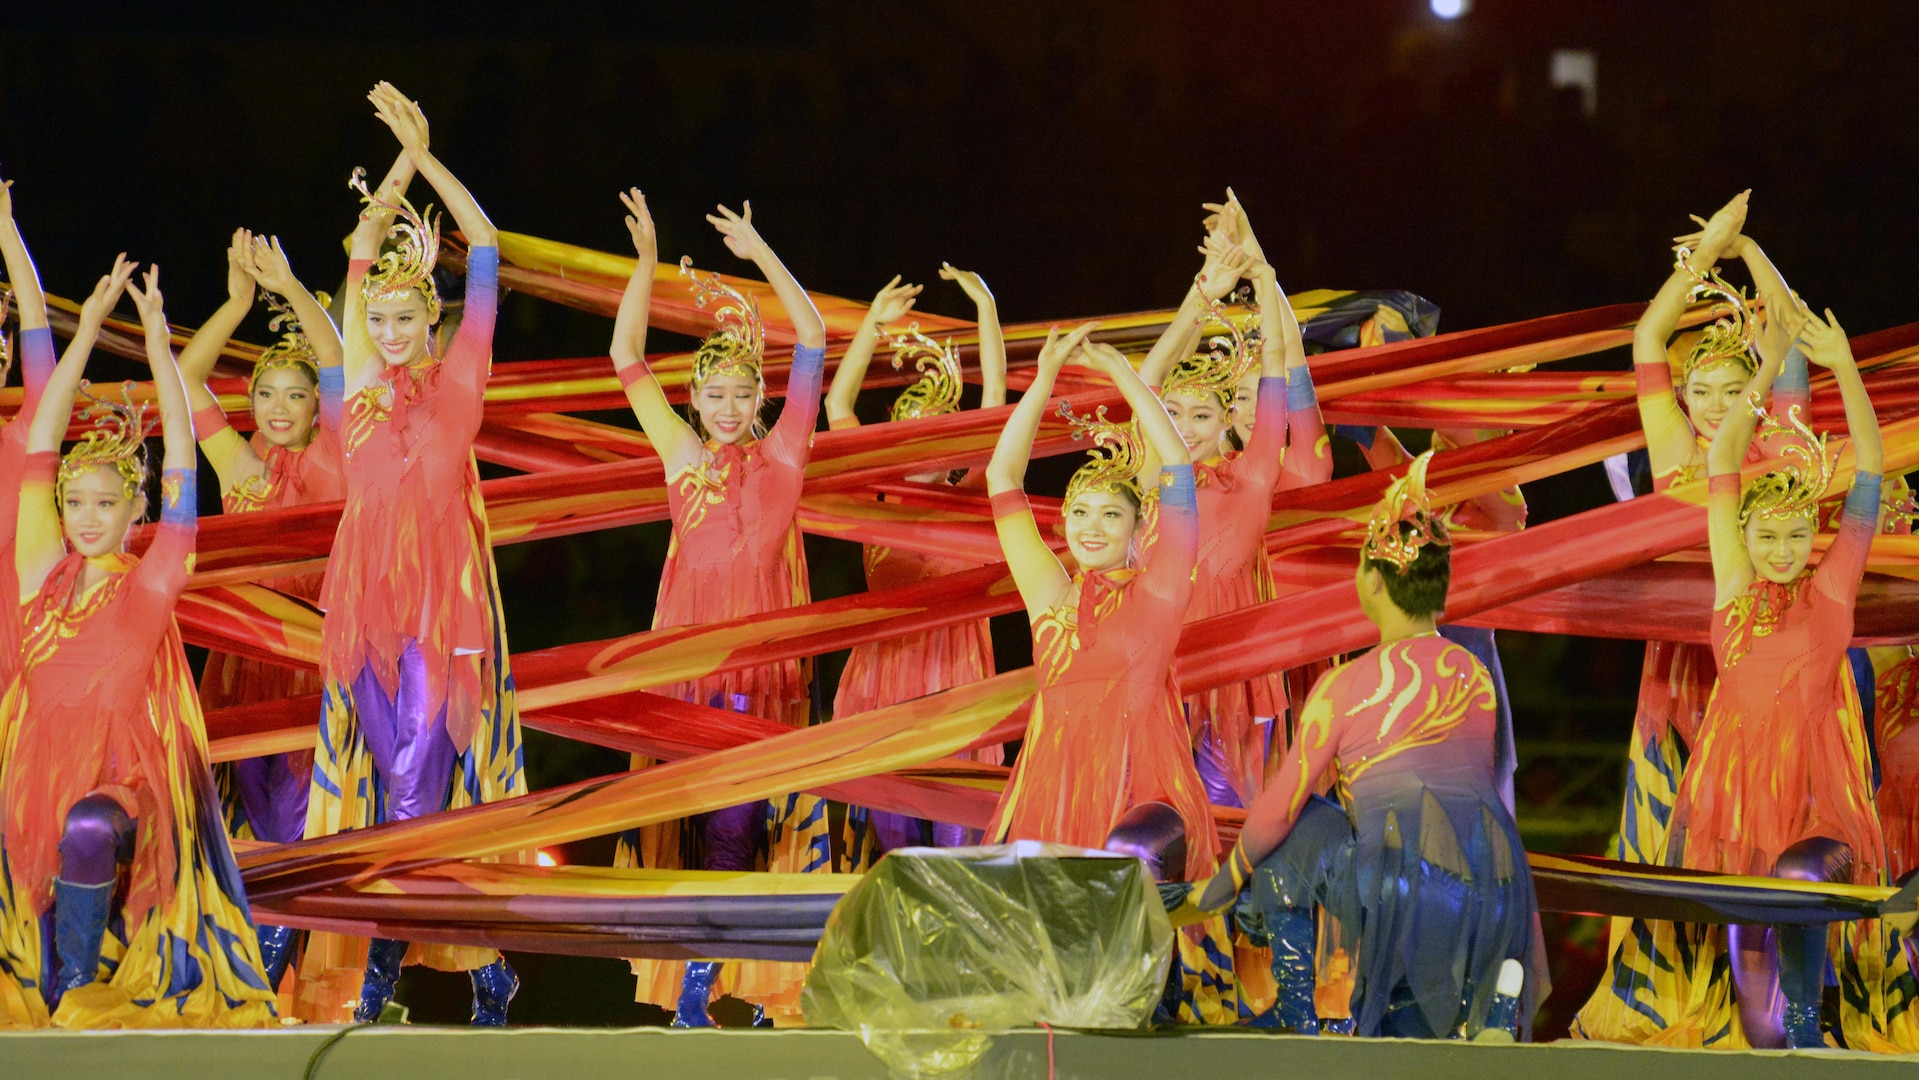 Dancers showcase the culture of Wuhan in central China's Hubei province, where the next CISM World Games will be held in 2019. The dance was part of closing ceremonies for the 6th CISM World Games in MunGyeong, South Korea, Oct. 11, 2015.